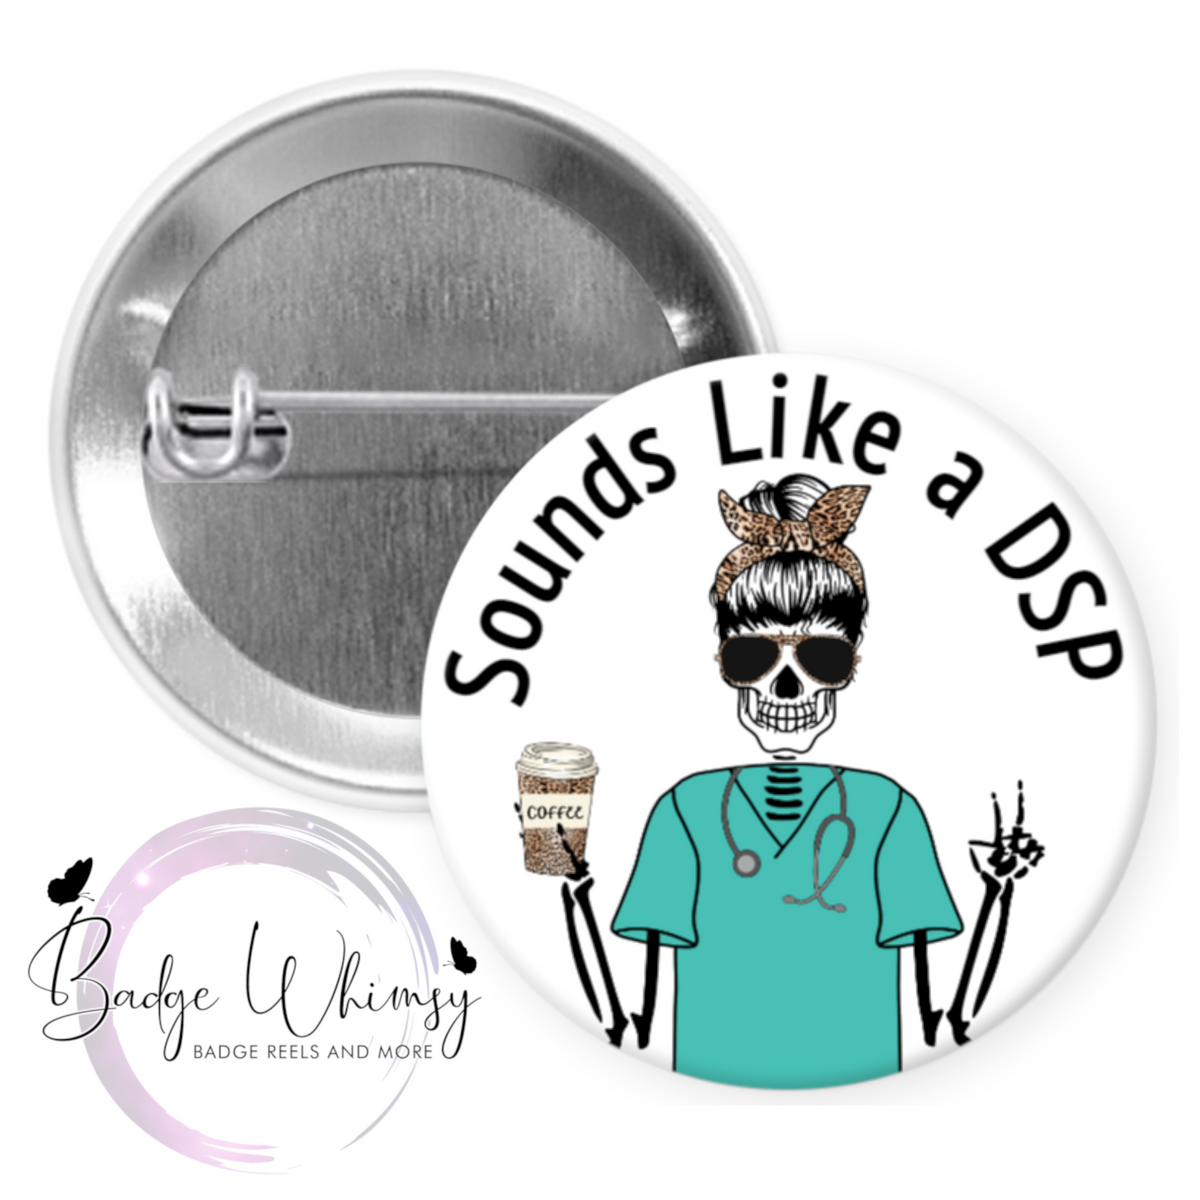 Nurse - Sounds Like a DSP - Day Shift Problem - Pin, Magnet or